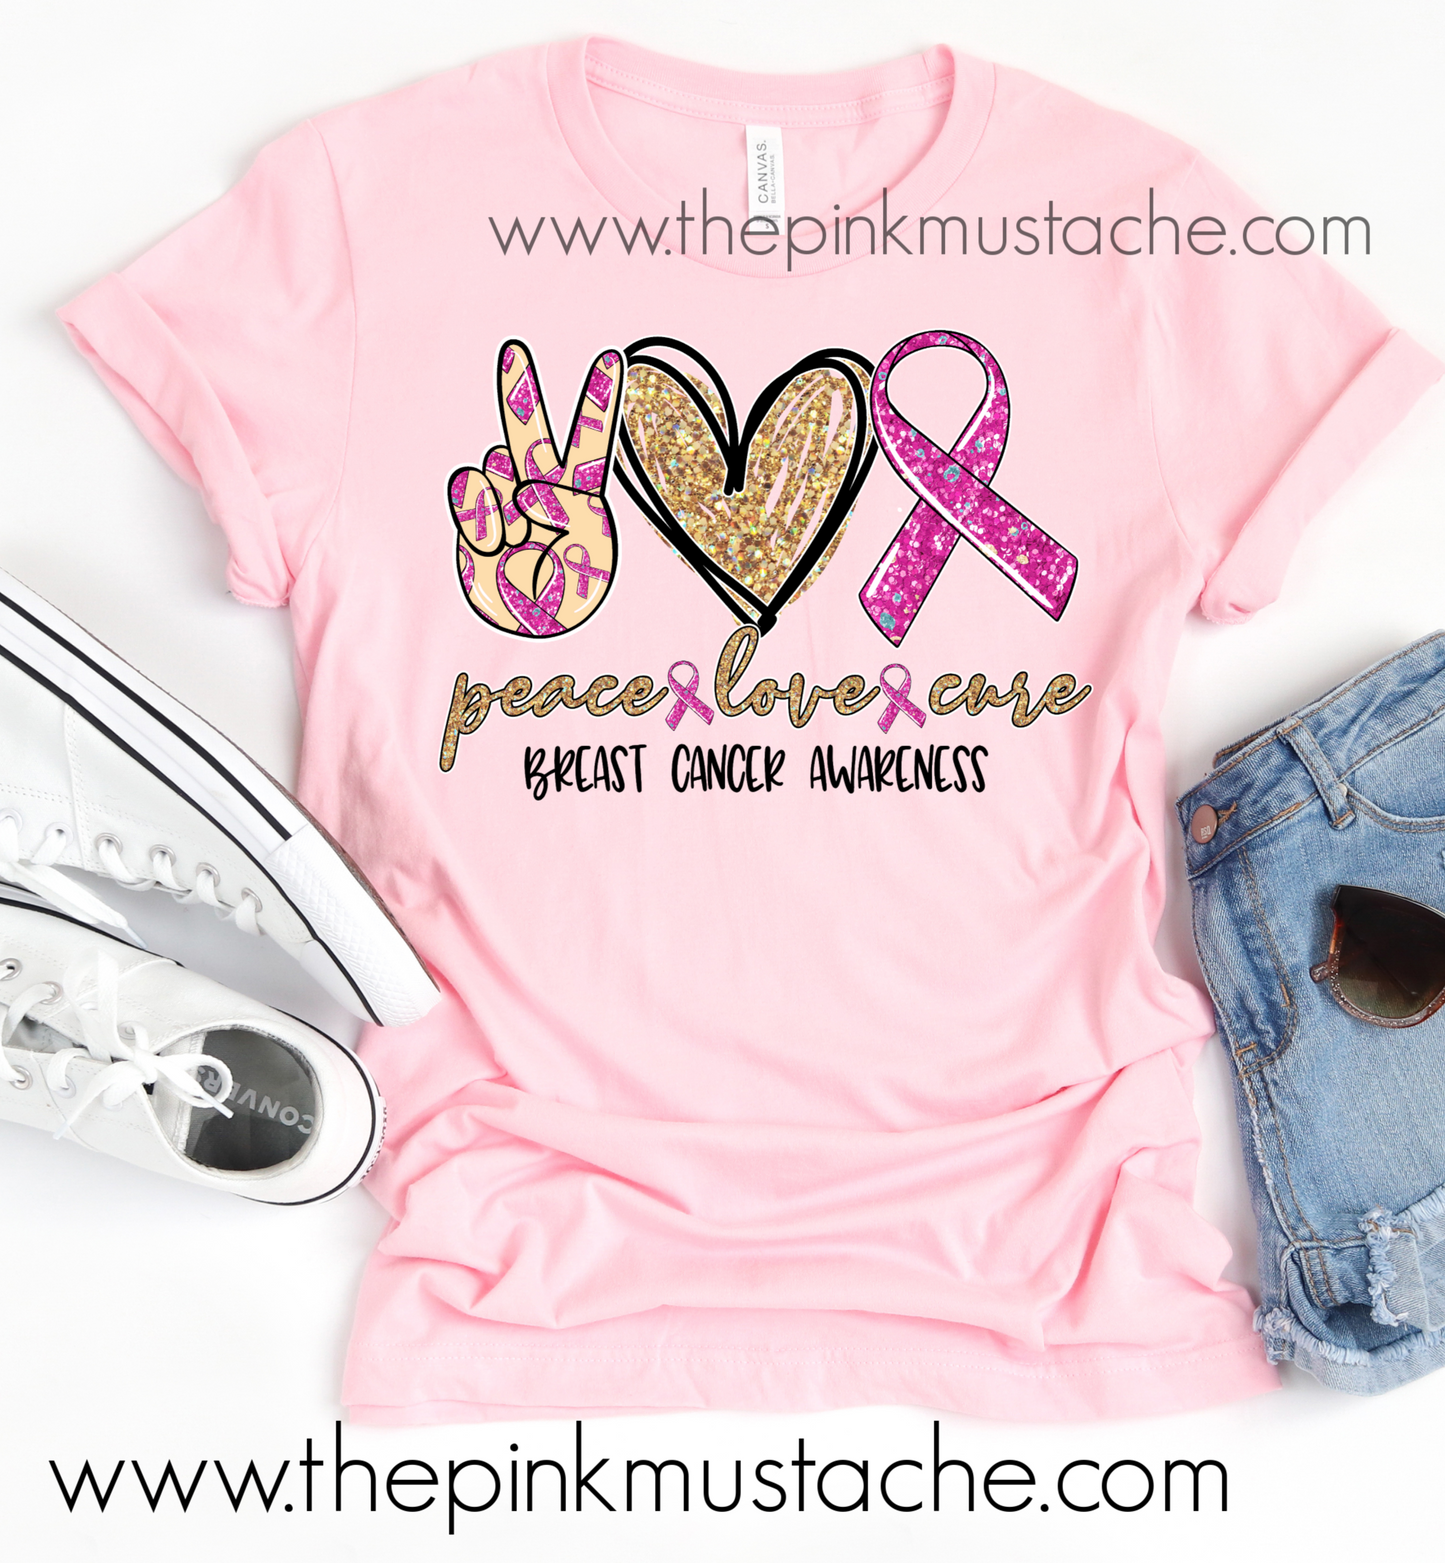 Peace Love Cure - Breast Cancer Awareness Tee / Unisex Sized Breast Cancer Awareness T-Shirt/ Youth and Adult Sizing Pink Ribbon